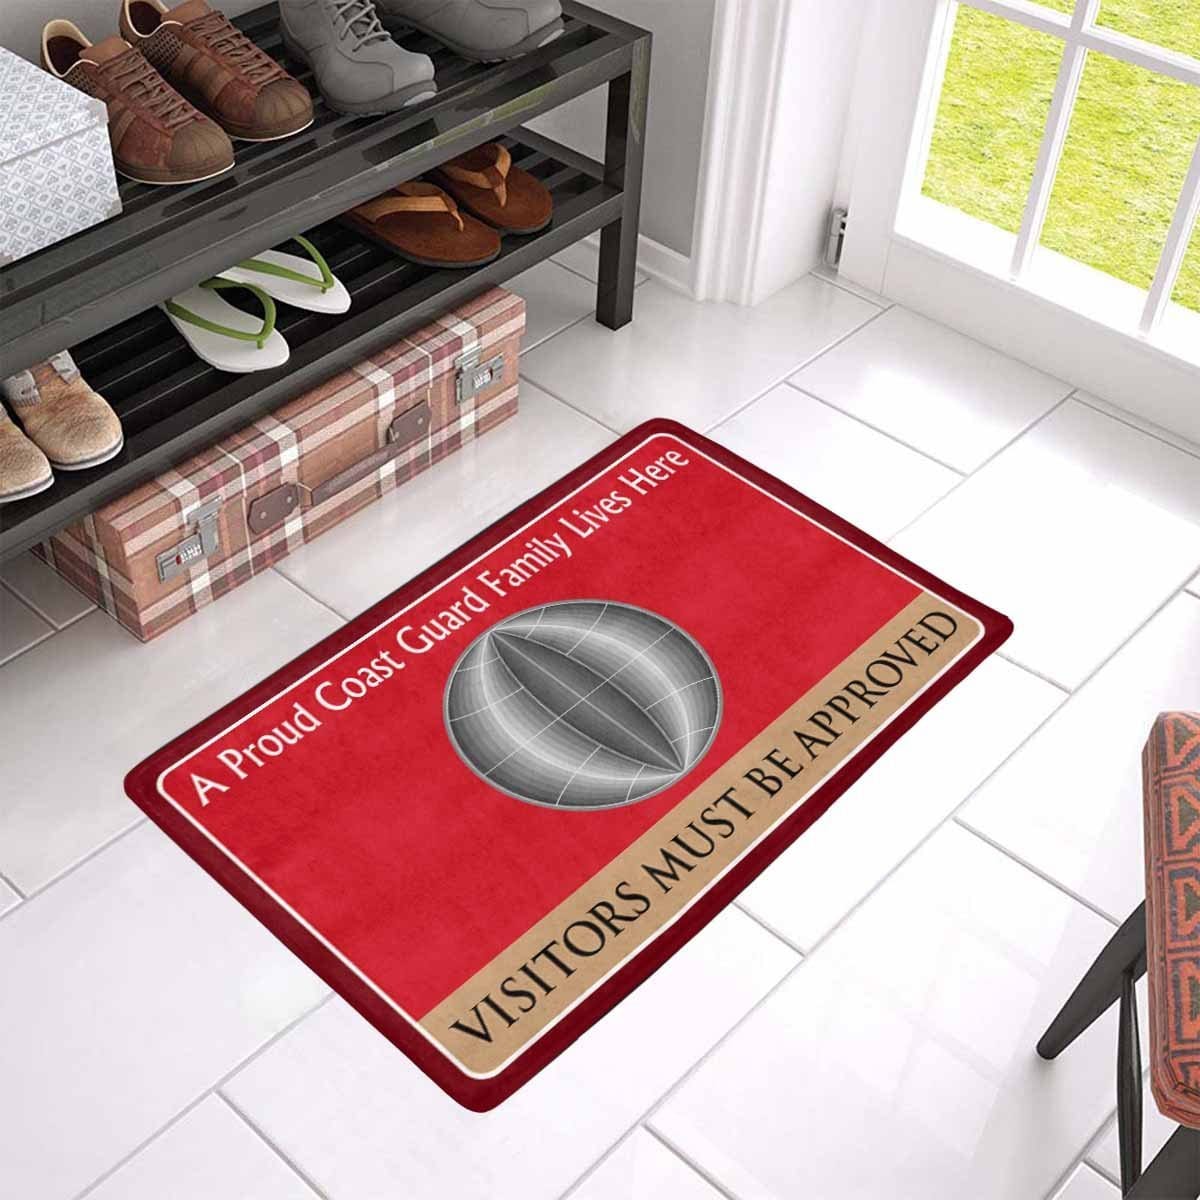 US Coast Guard Electrician's Mate EM Logo Family Doormat - Visitors must be approved (23.6 inches x 15.7 inches)-Doormat-USCG-Rate-Veterans Nation